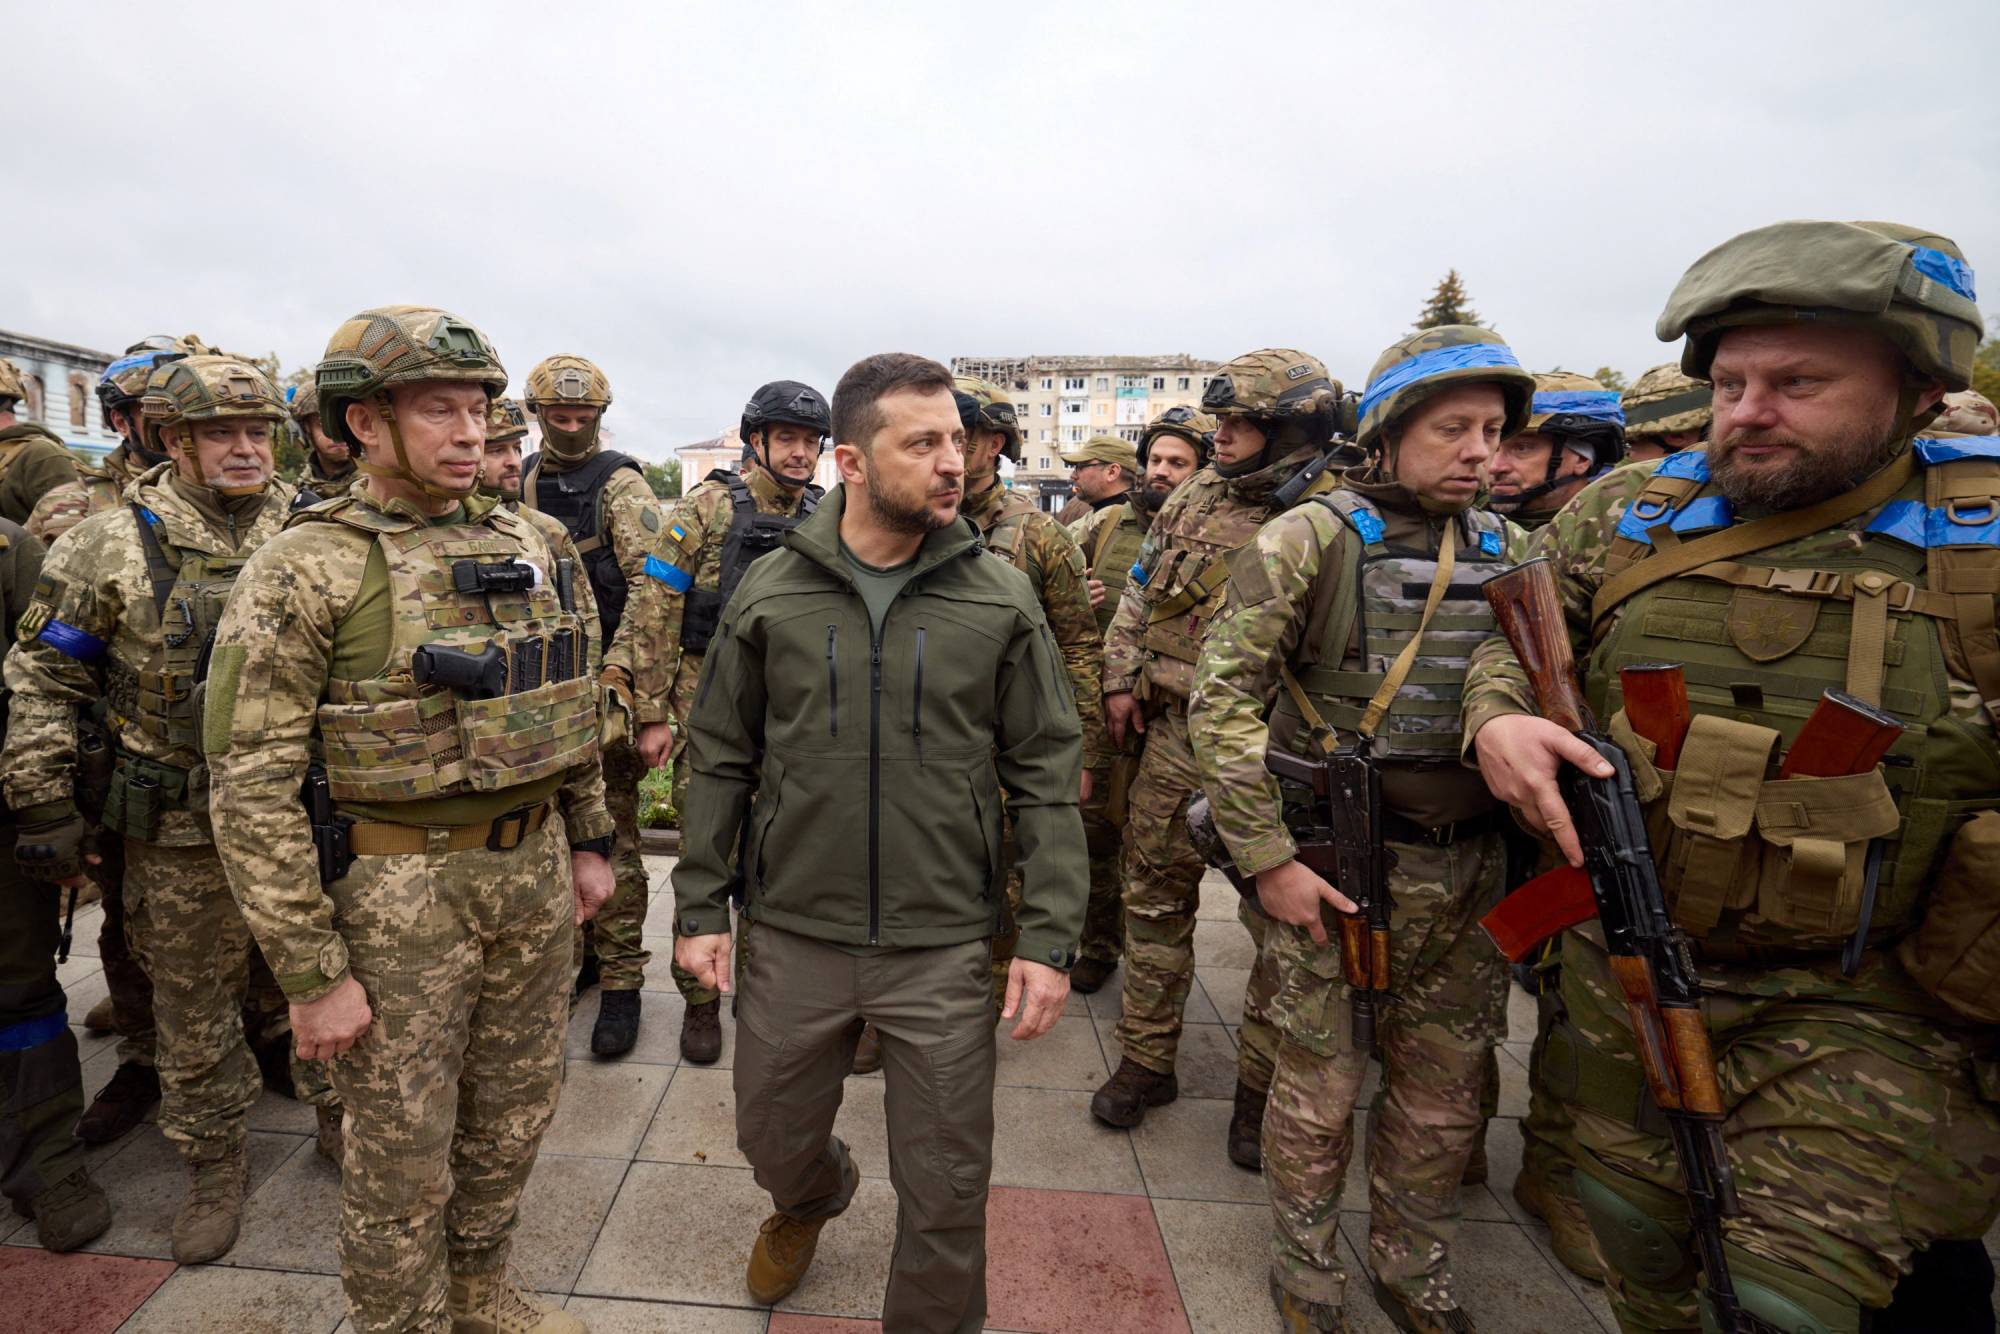 Ukrainian President Volodymyr Zelenskyy visits the town of Izium on Wednesday. The area was recently liberated by the Ukrainian military during counteroffensive operations against occupying Russian forces. | REUTERS 